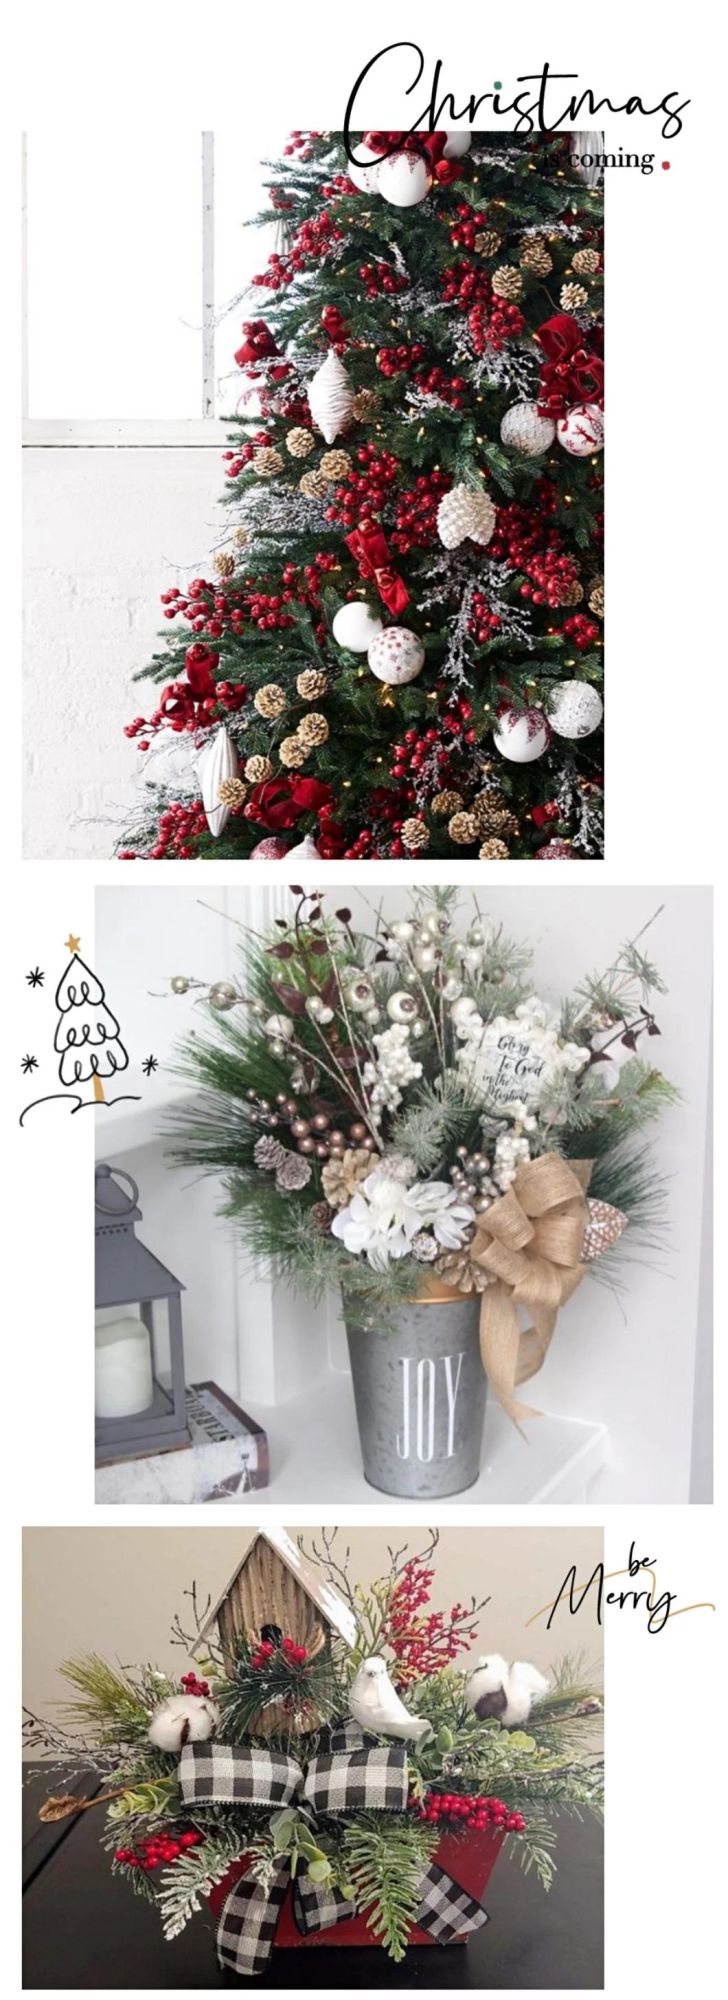 Artificial Flowers Decoration Flowers and Wreaths Garlands Floistry Christmas Picks